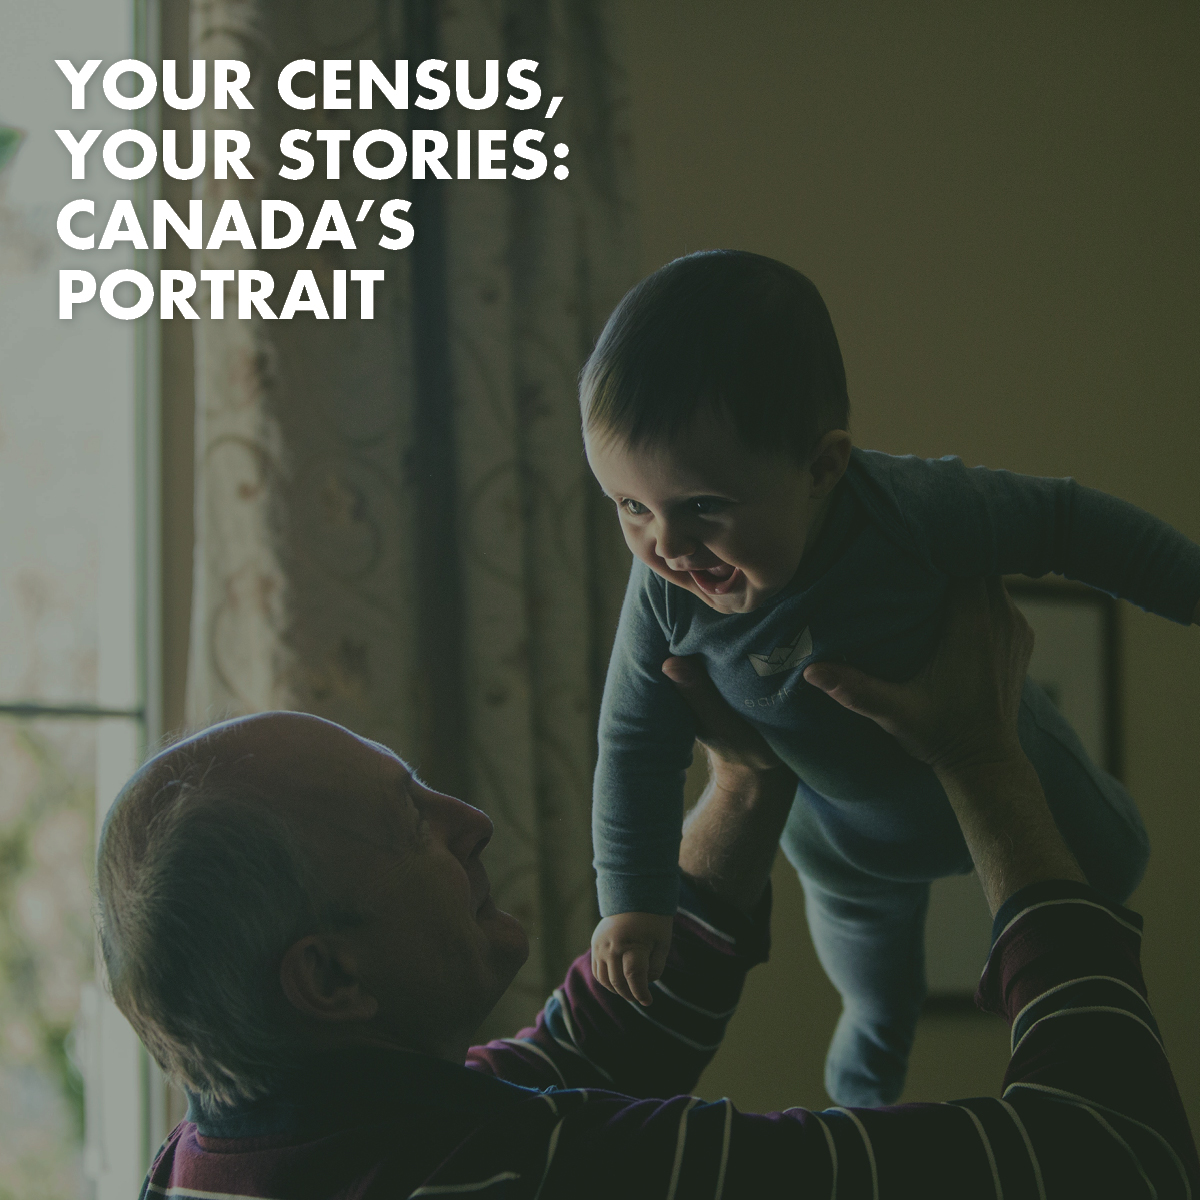 Old man holding a smiling baby Text overlay says "Your census, your stories: Canada's portrait"